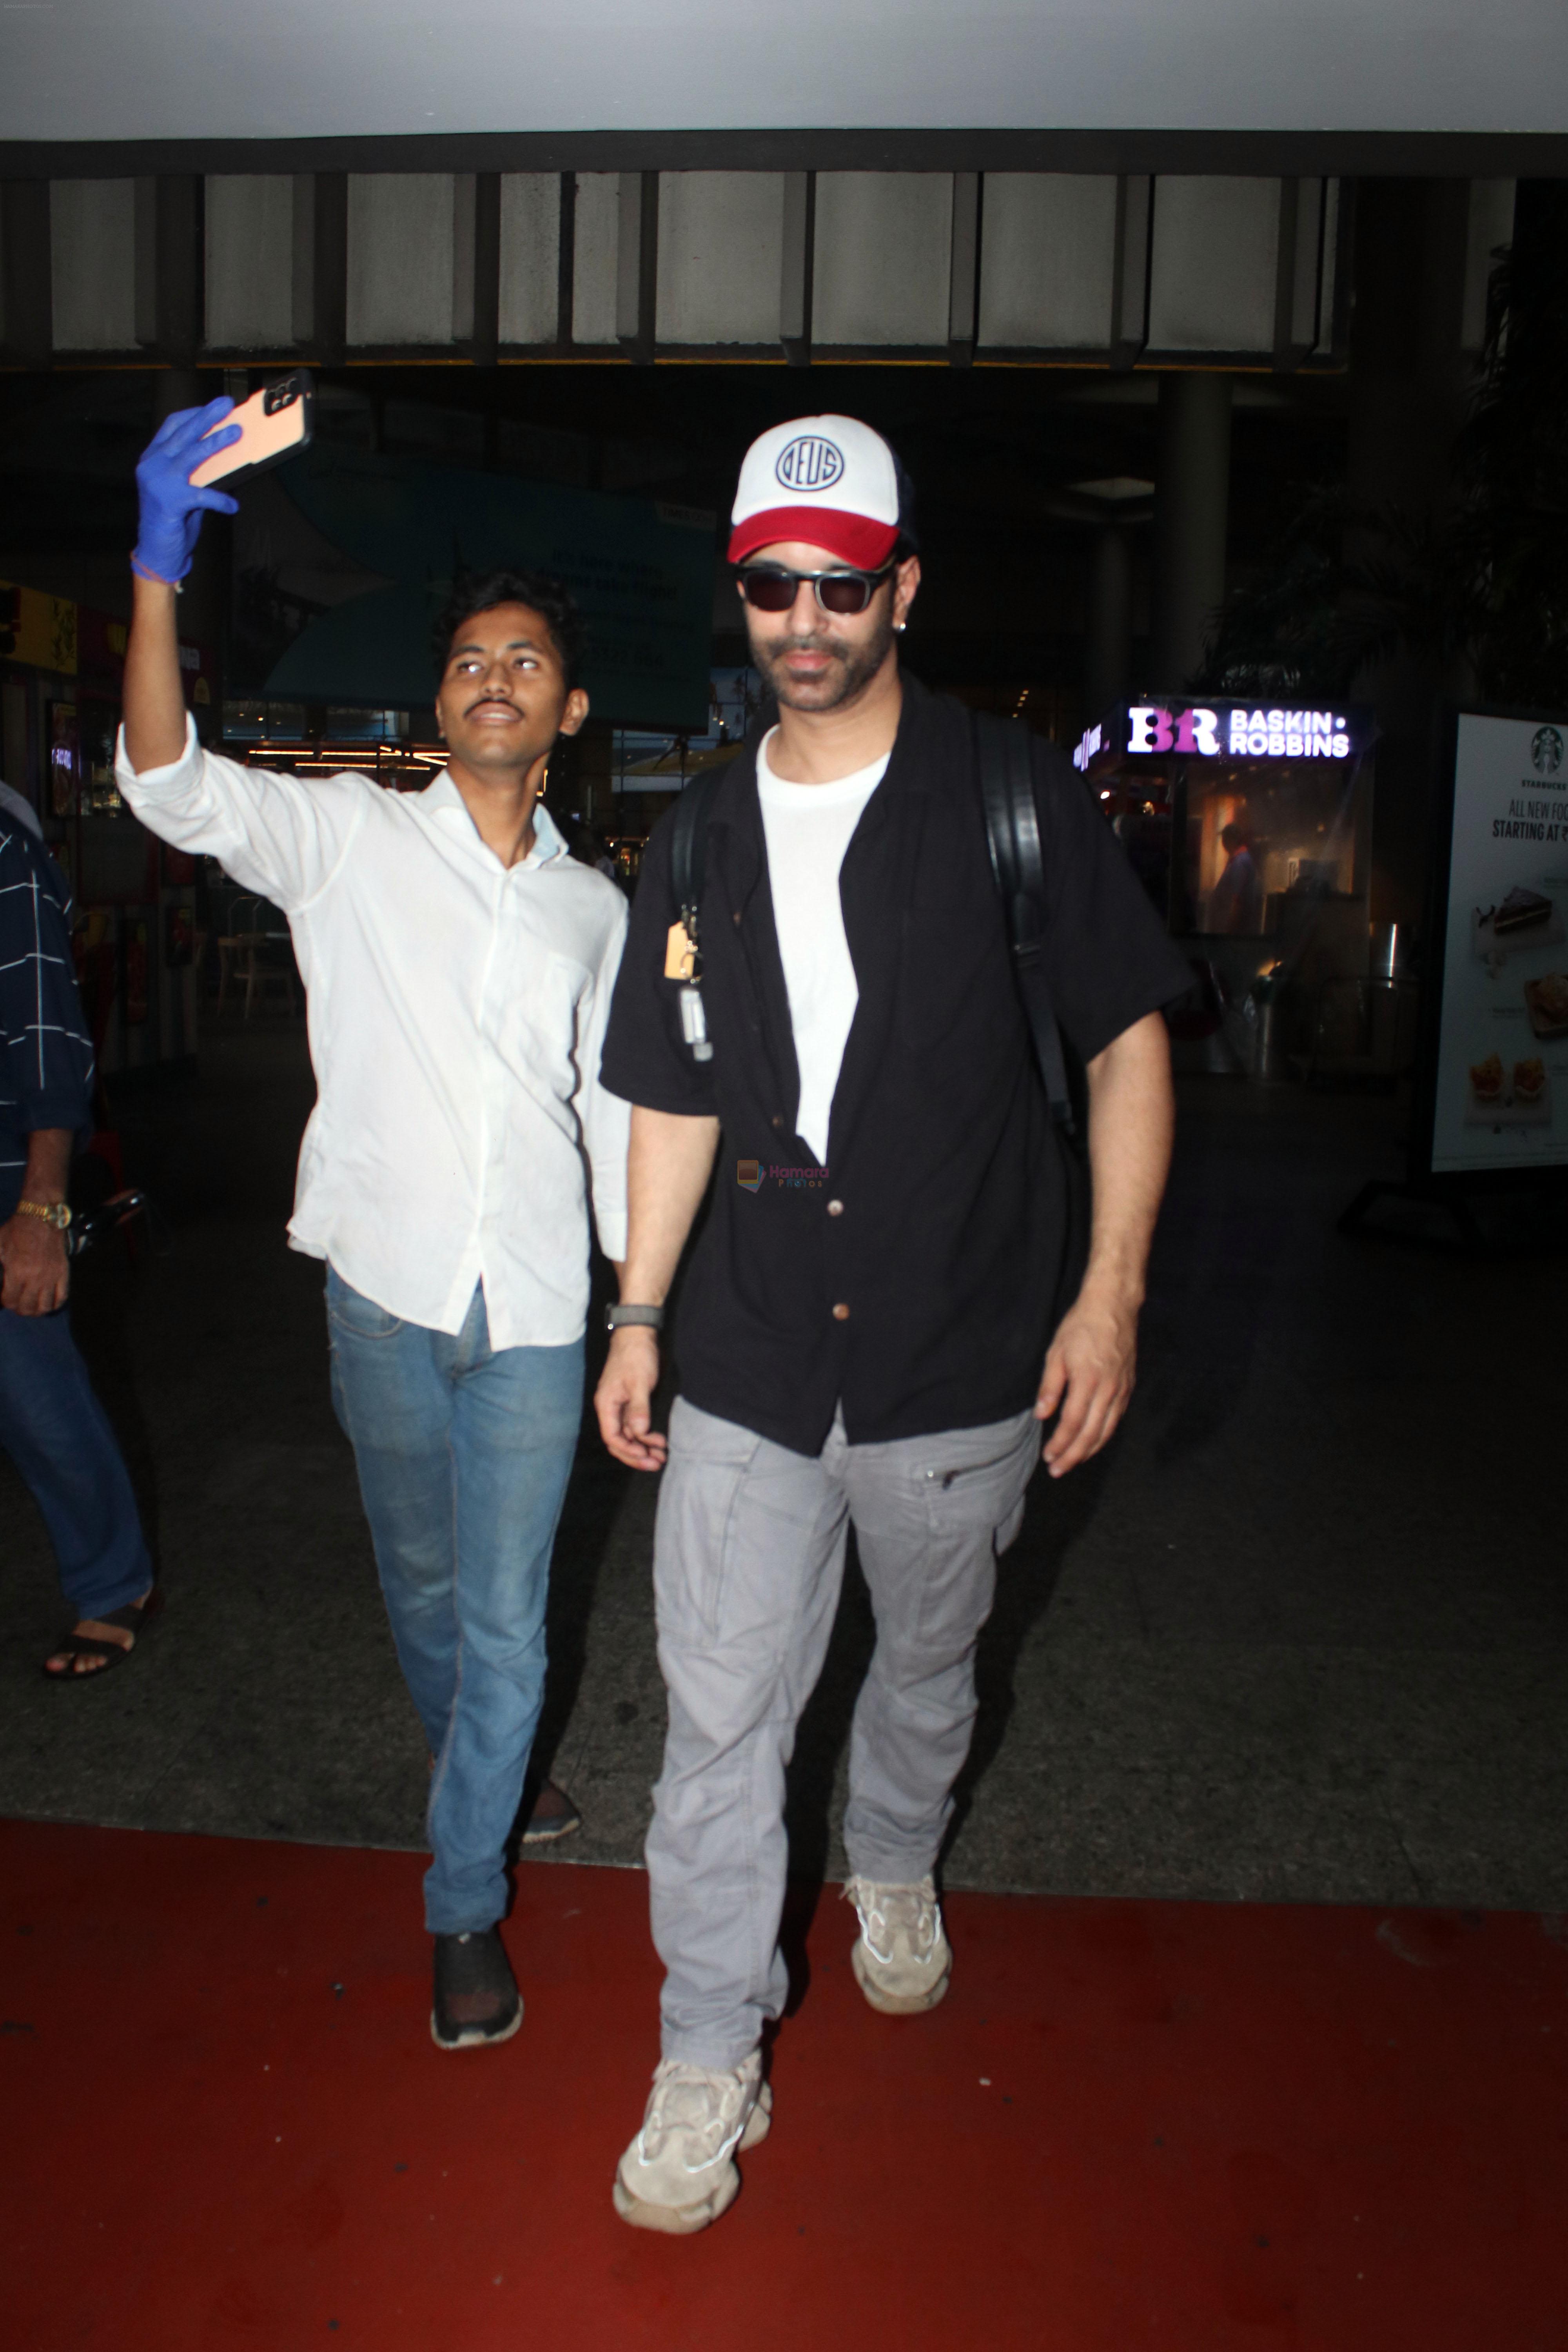 Aamir Ali seen at the airport on 24 July 2023